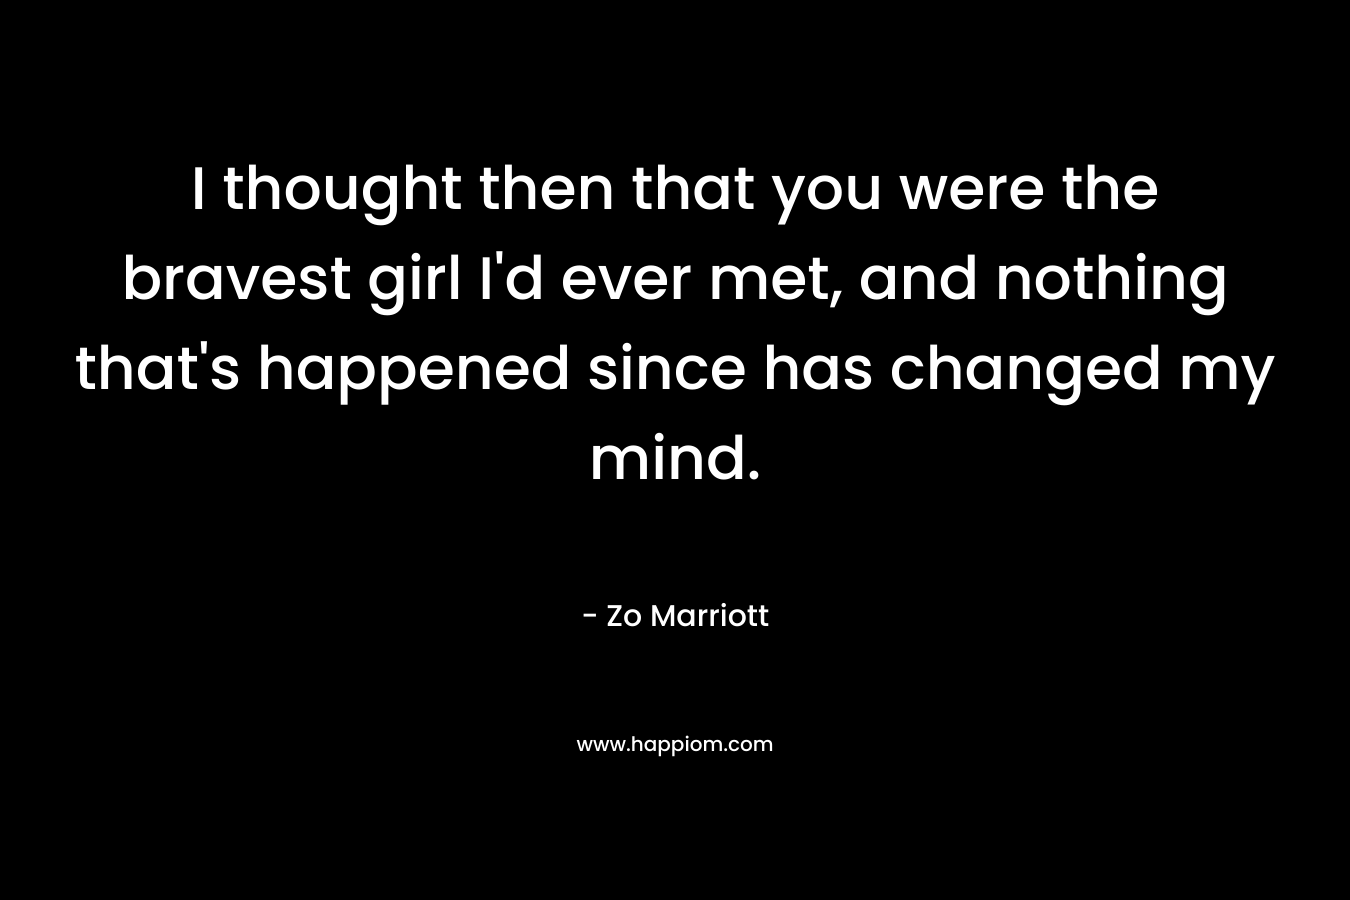 I thought then that you were the bravest girl I'd ever met, and nothing that's happened since has changed my mind.